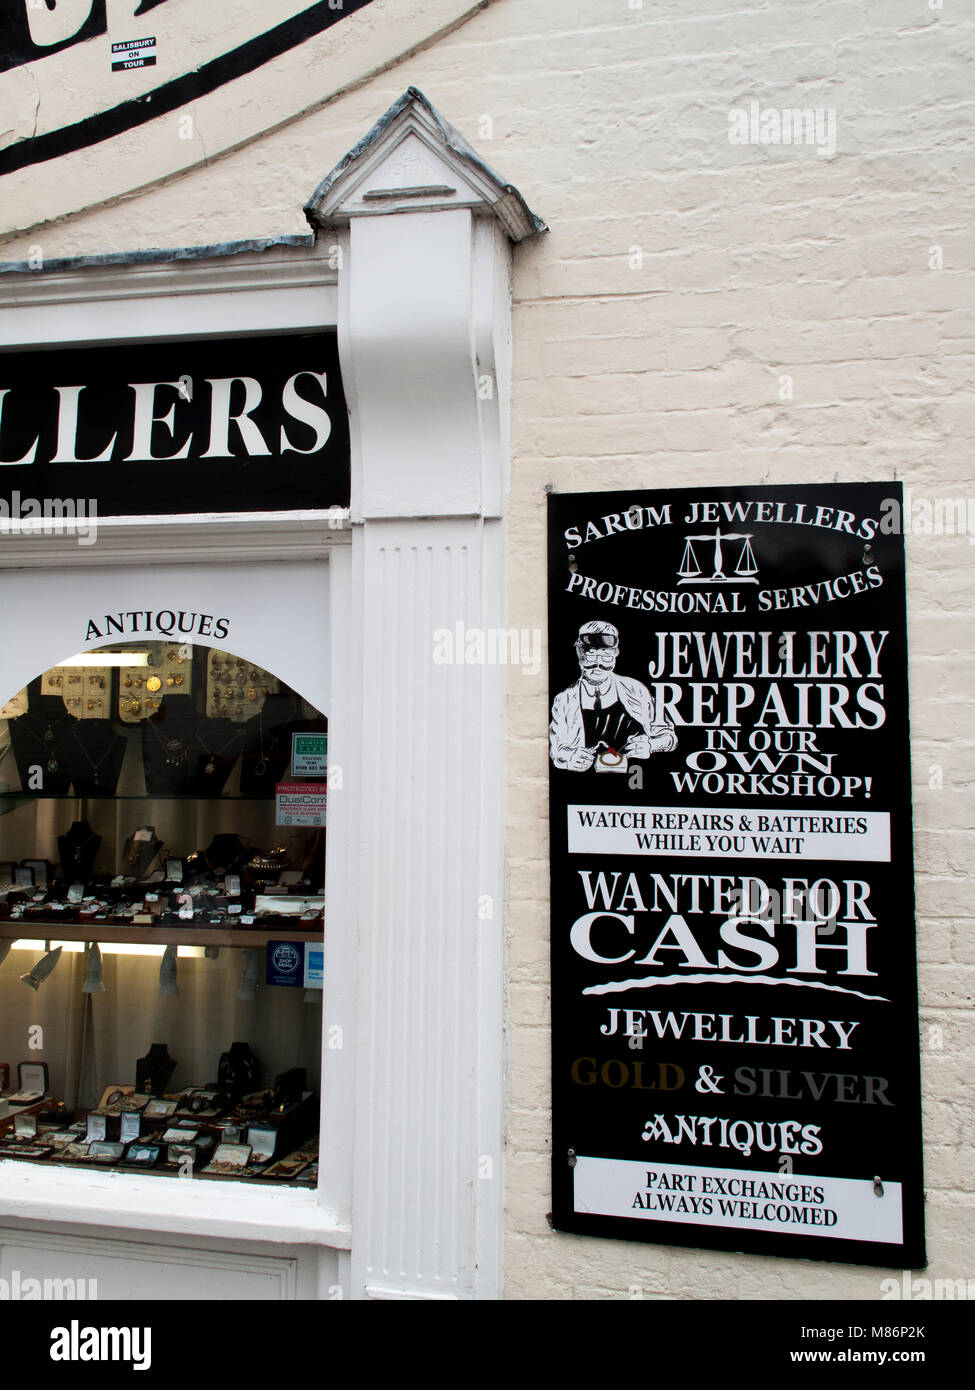 Sarum jewellers Professional Services, repairs in their own workshop advertising board and window display Stock Photo